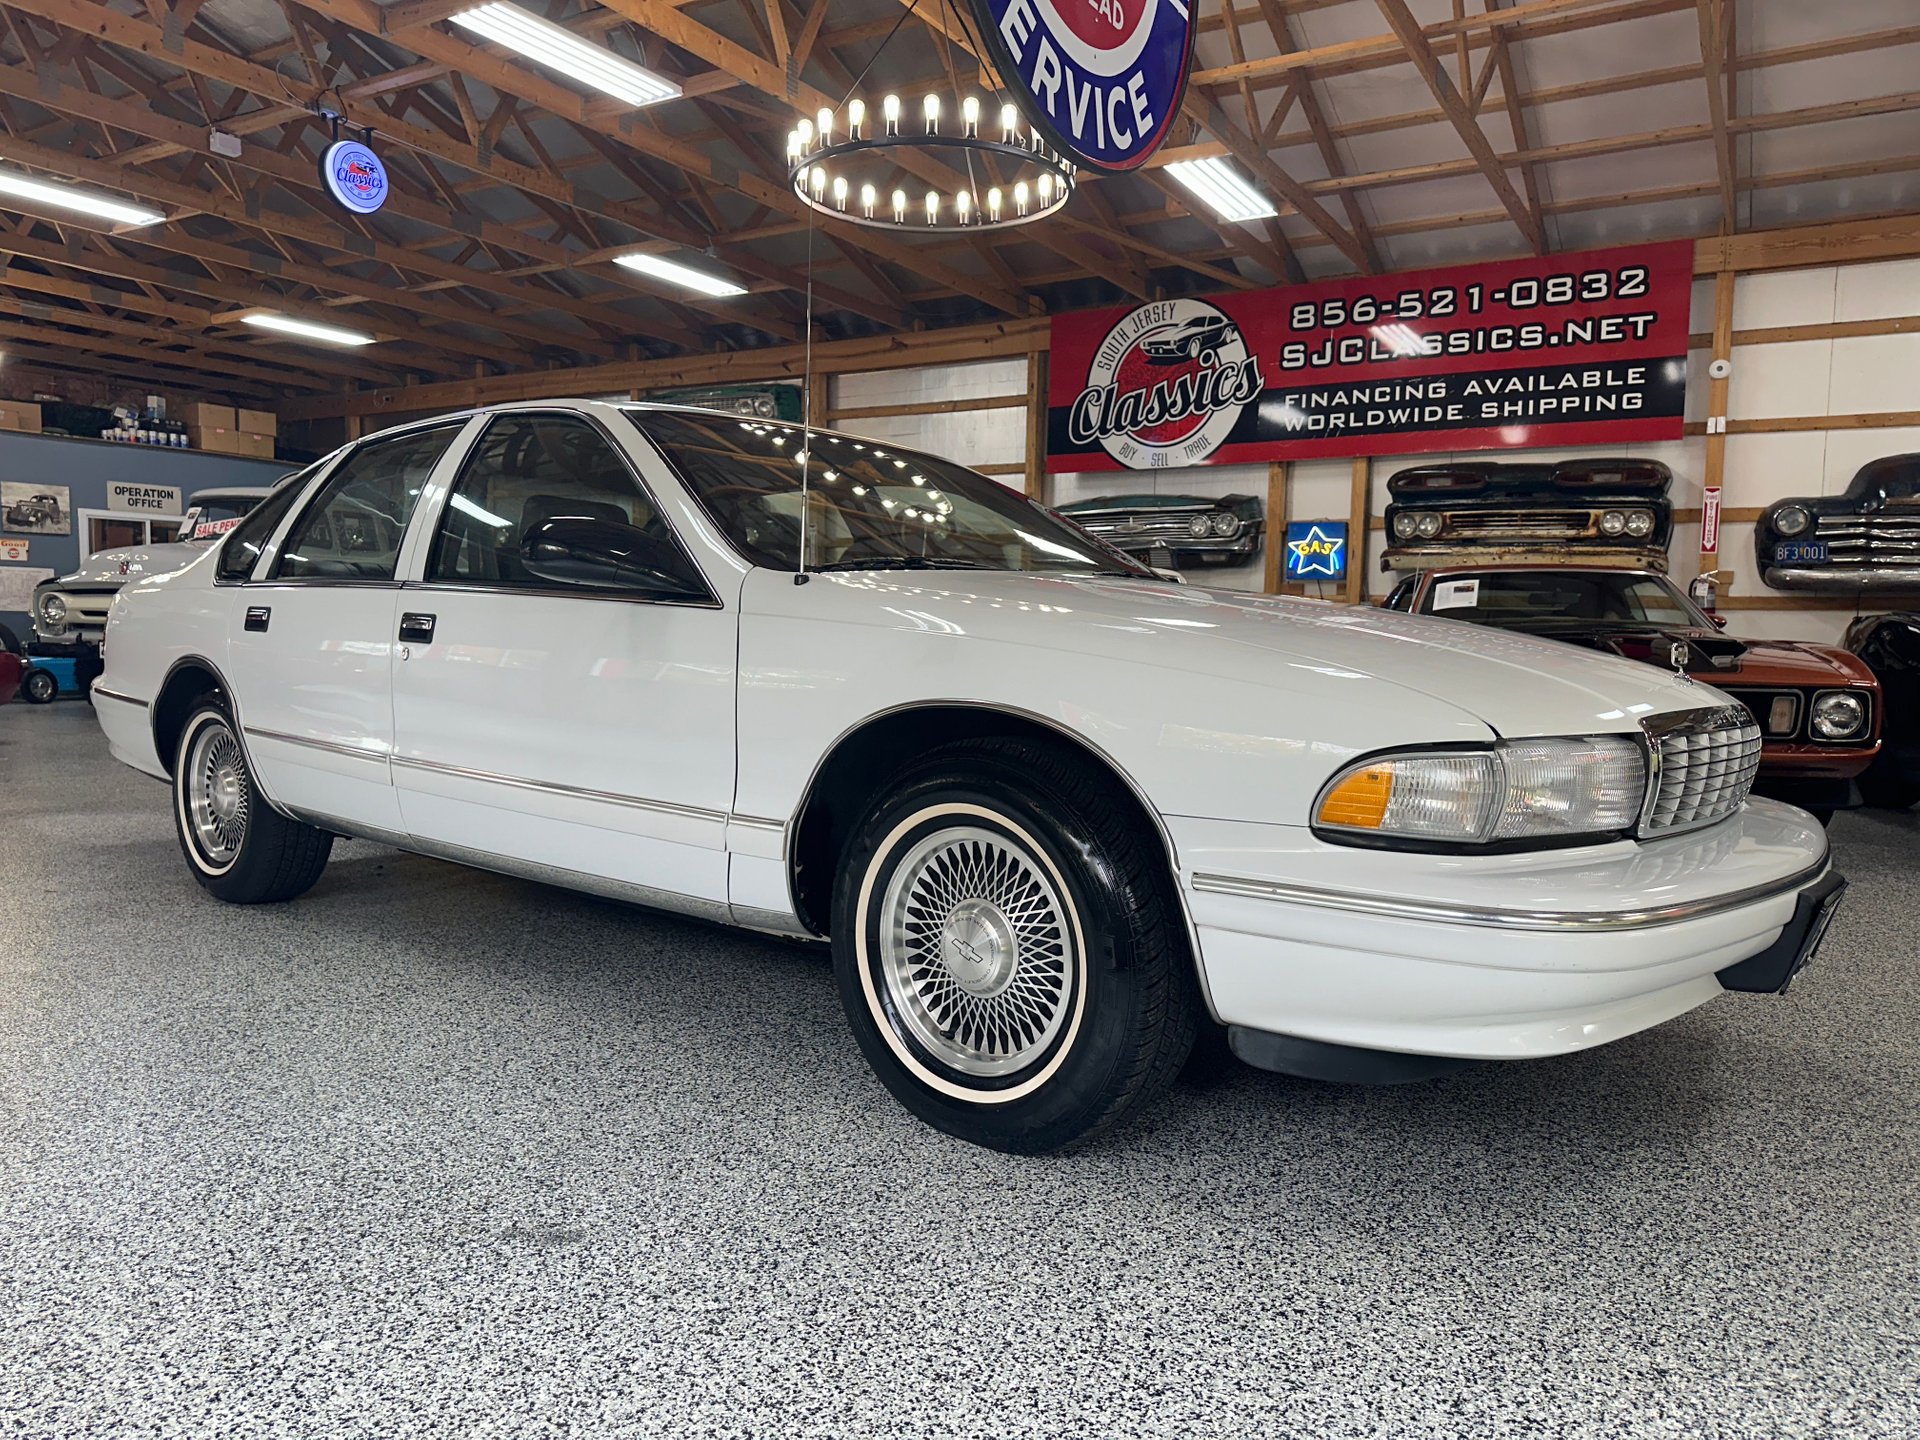 1996 Chevrolet Caprice | South Jersey Classics